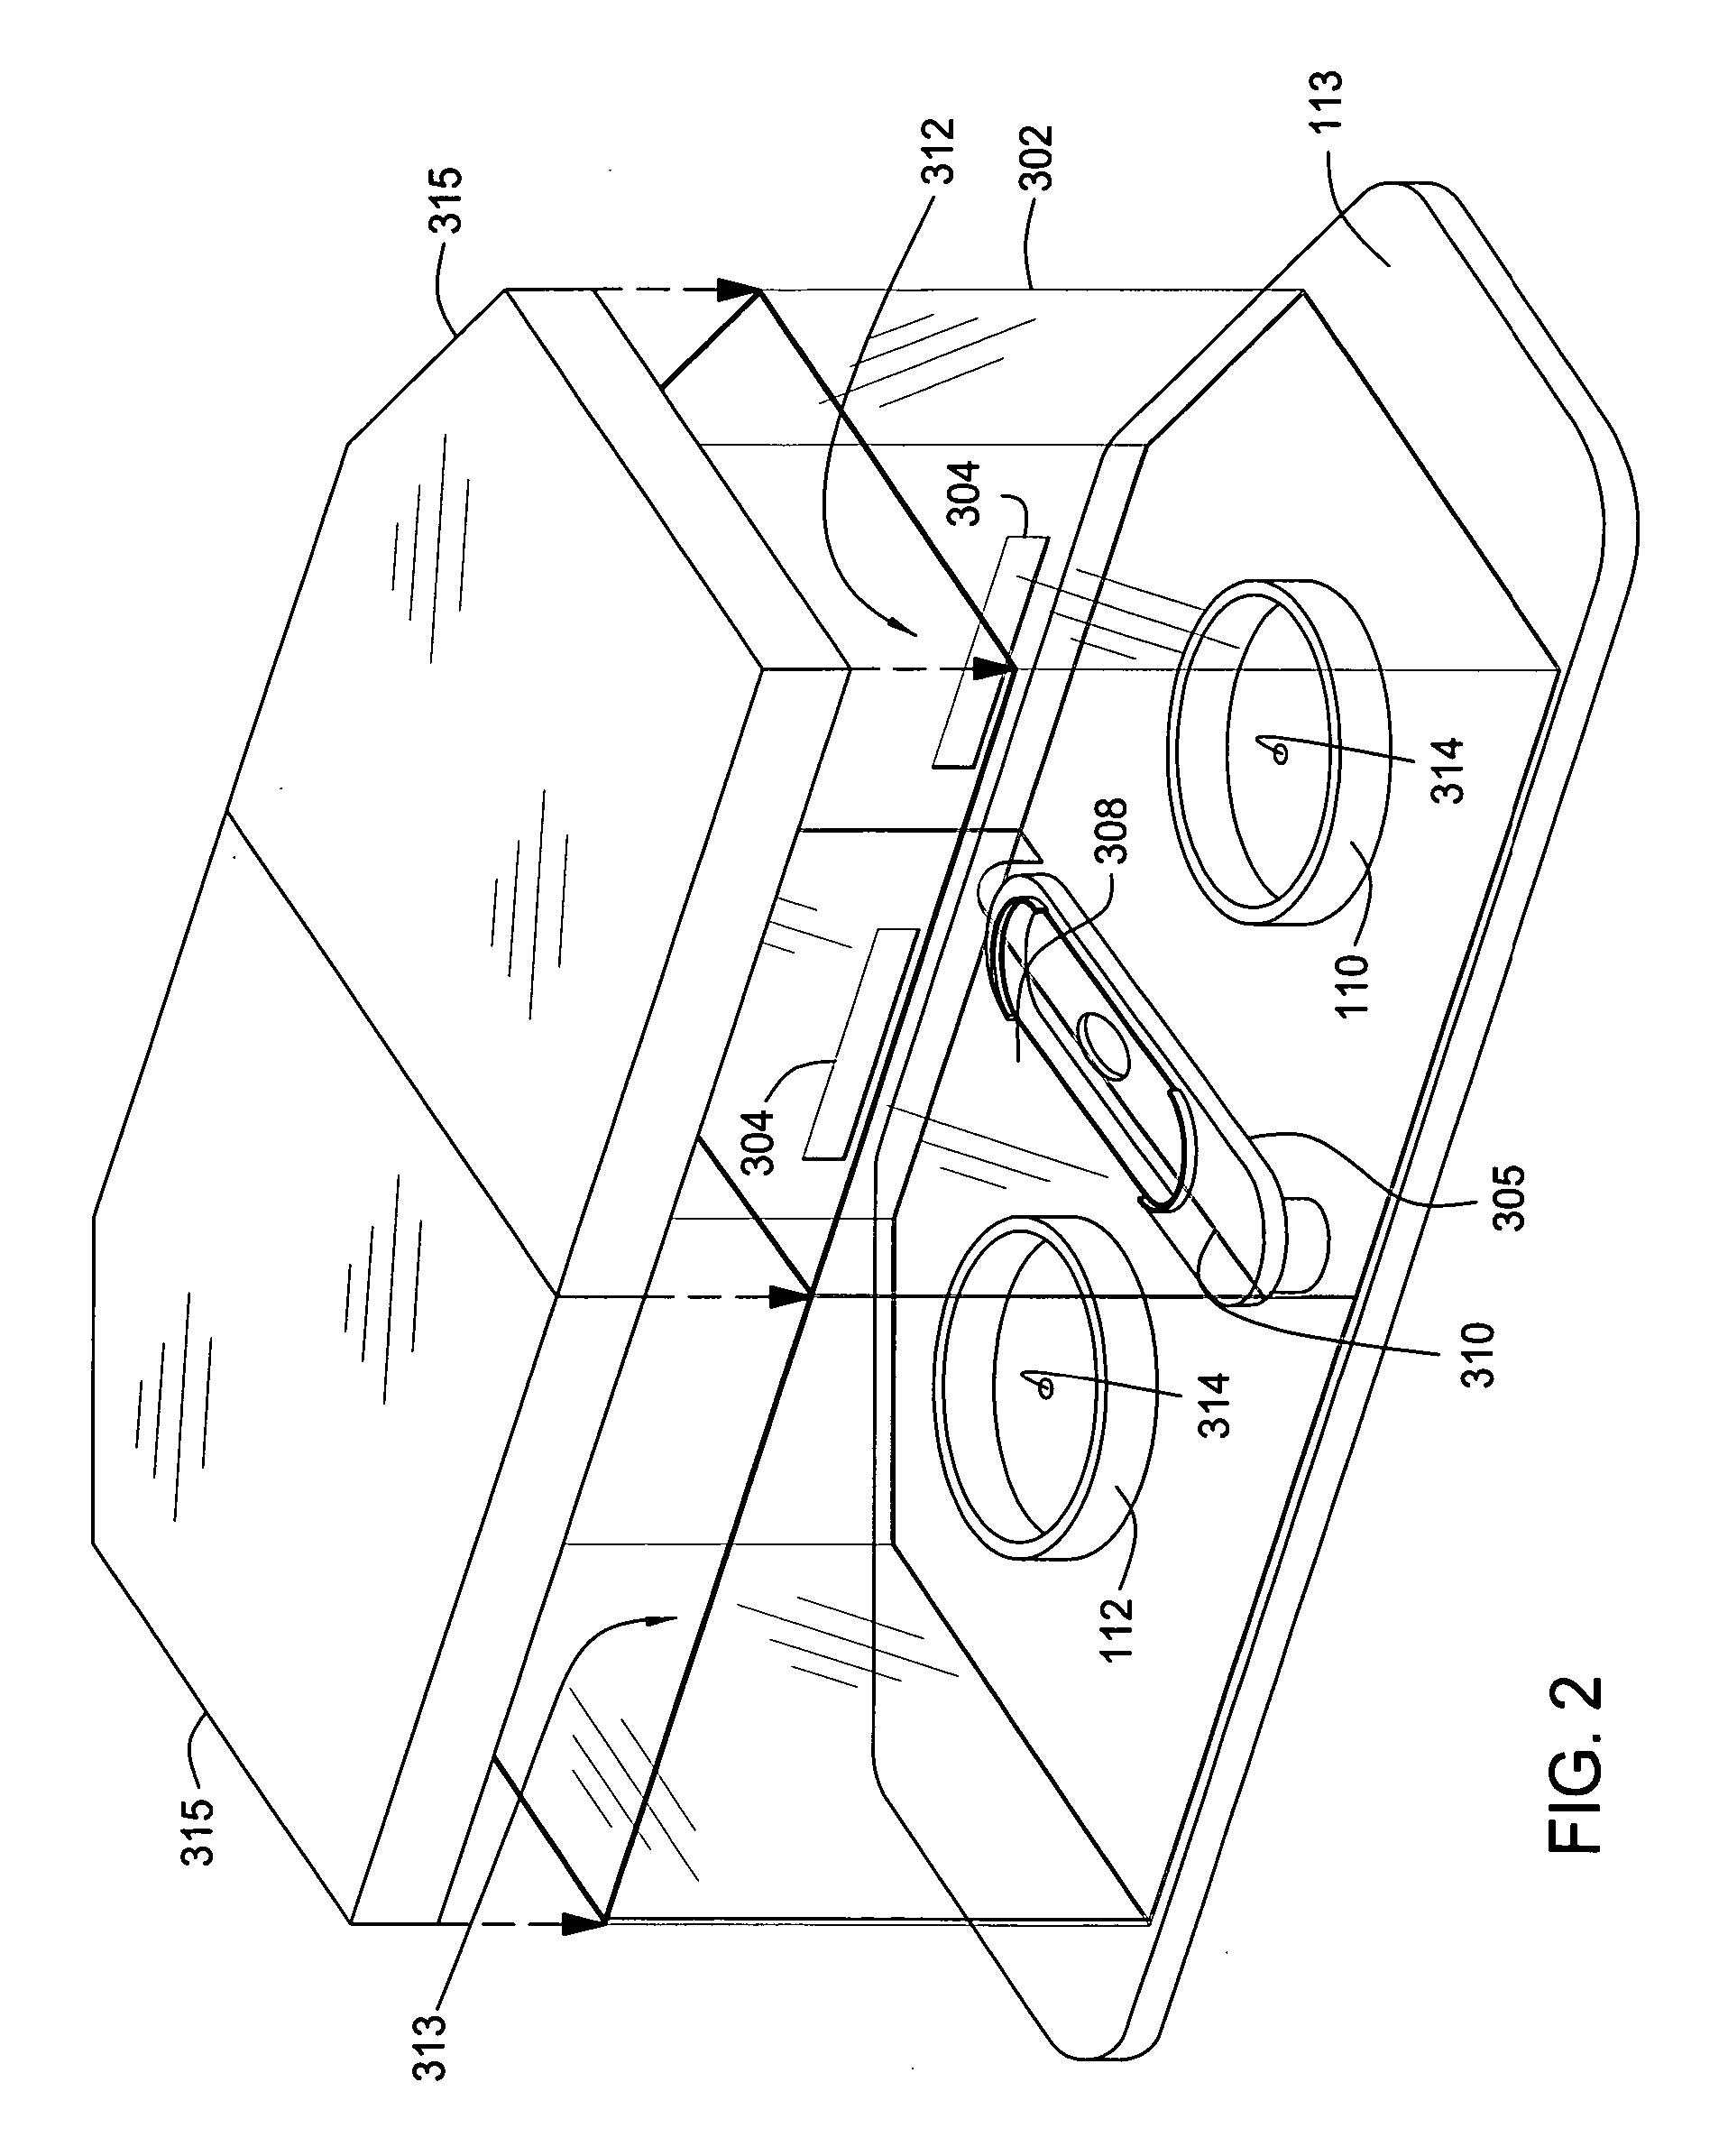 Apparatus for electroless deposition of metals onto semiconductor substrates